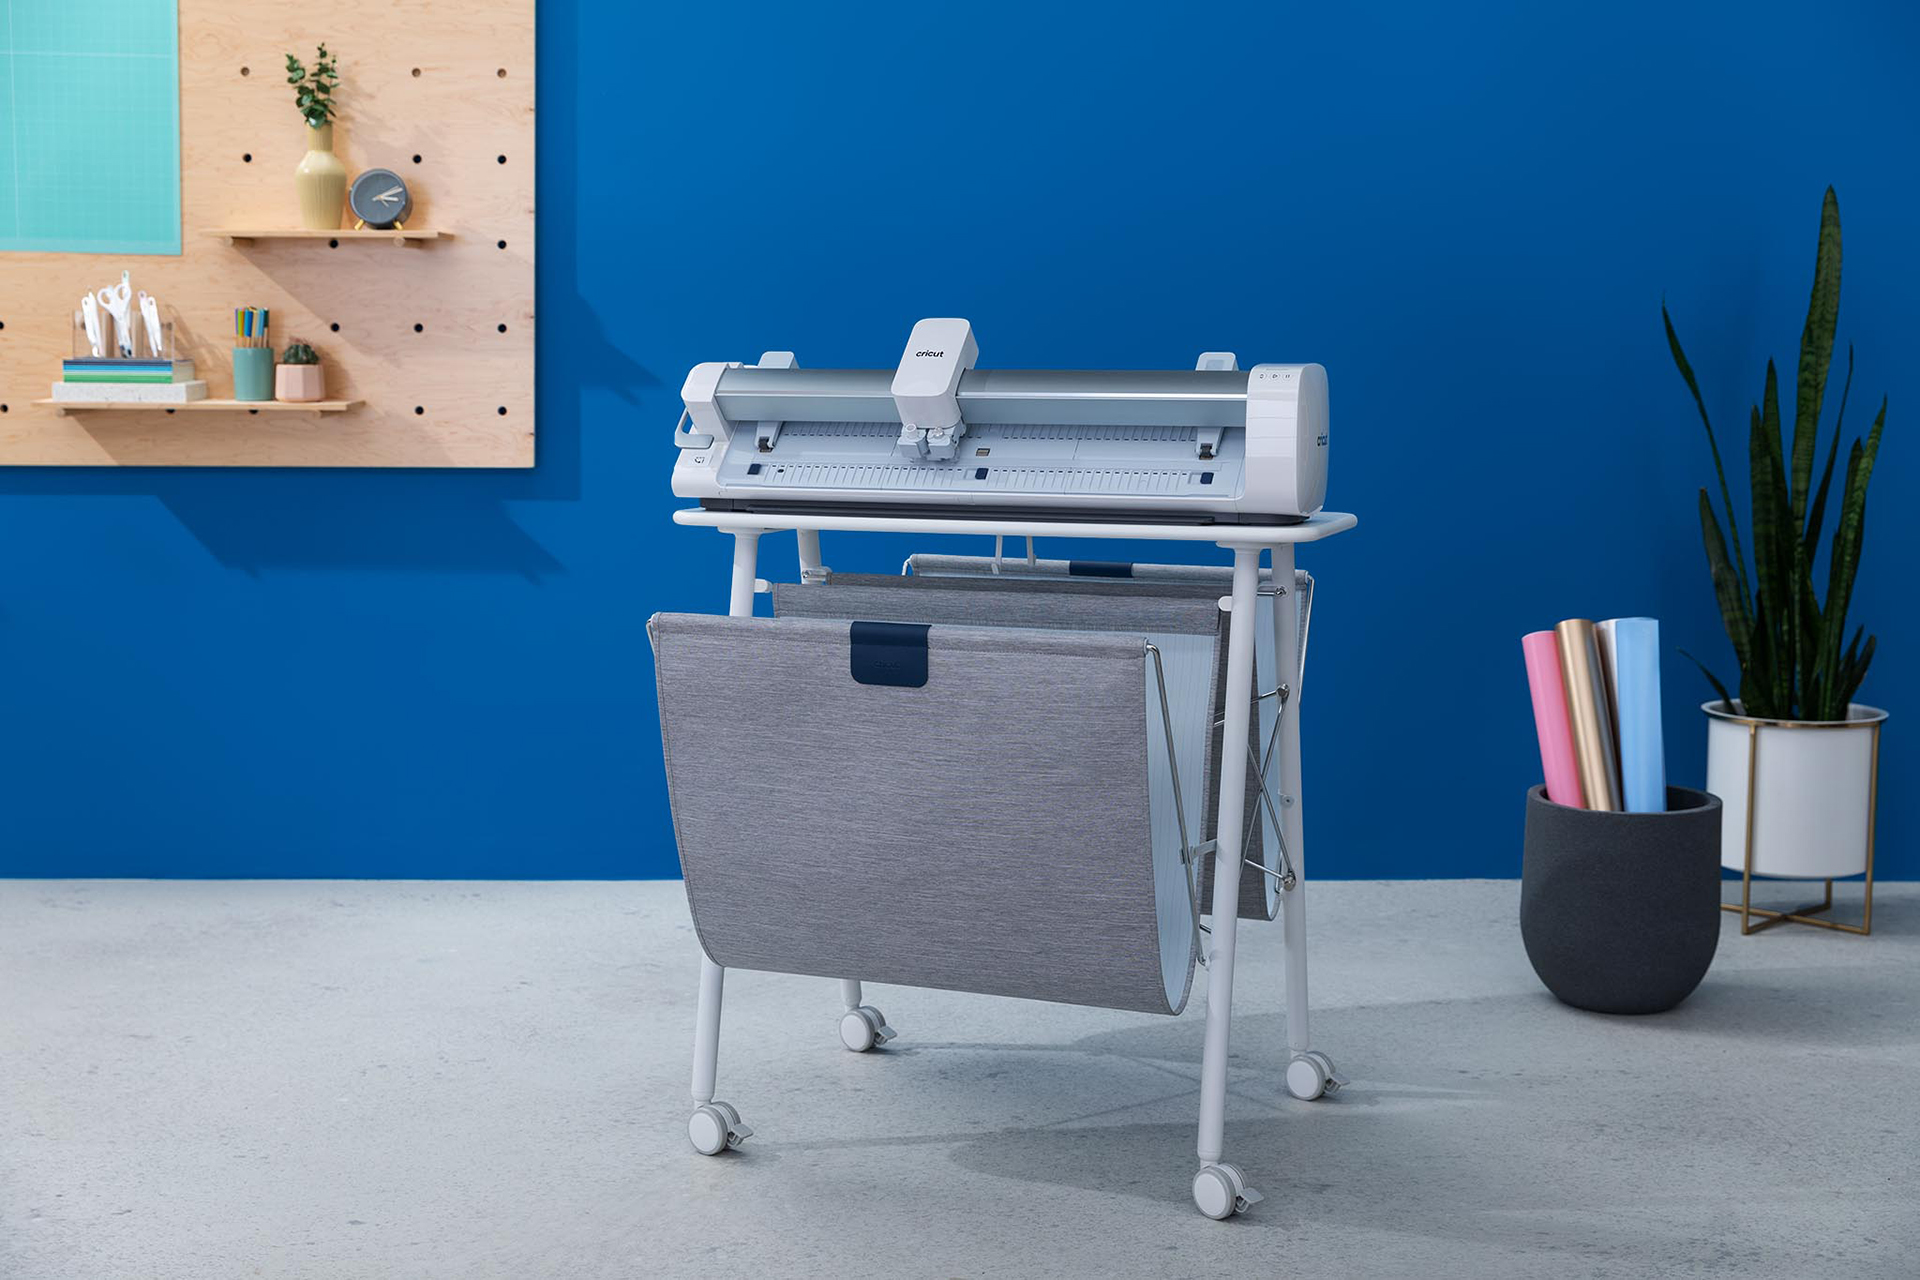 Introducing Cricut Venture, the largest and fastest cutting machine on the Cricut® platform